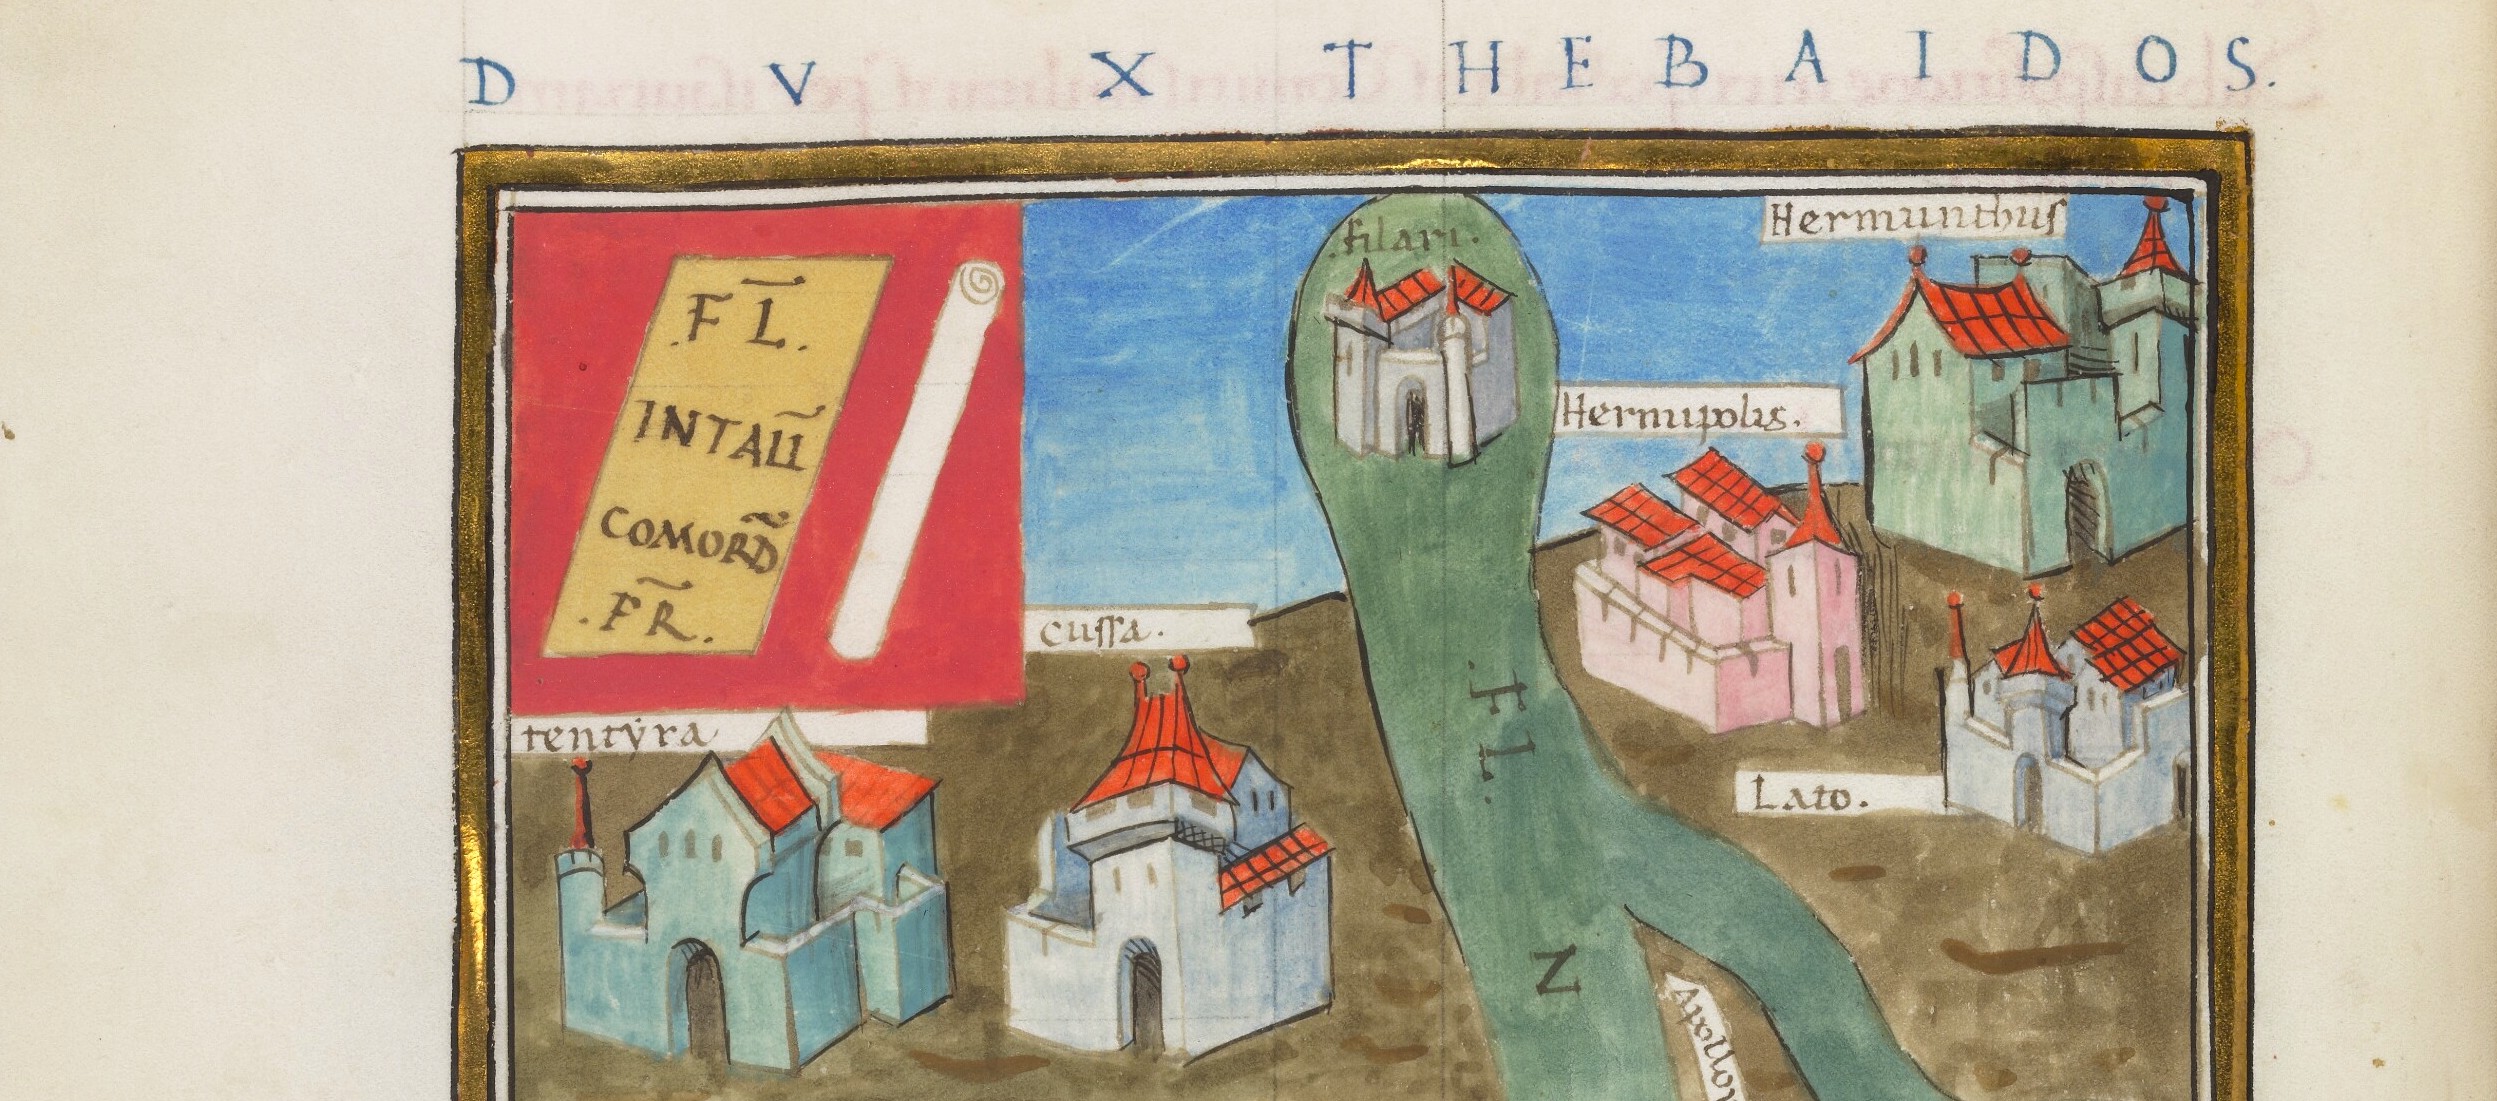 A section of an illuminated manuscript showing a 3D map